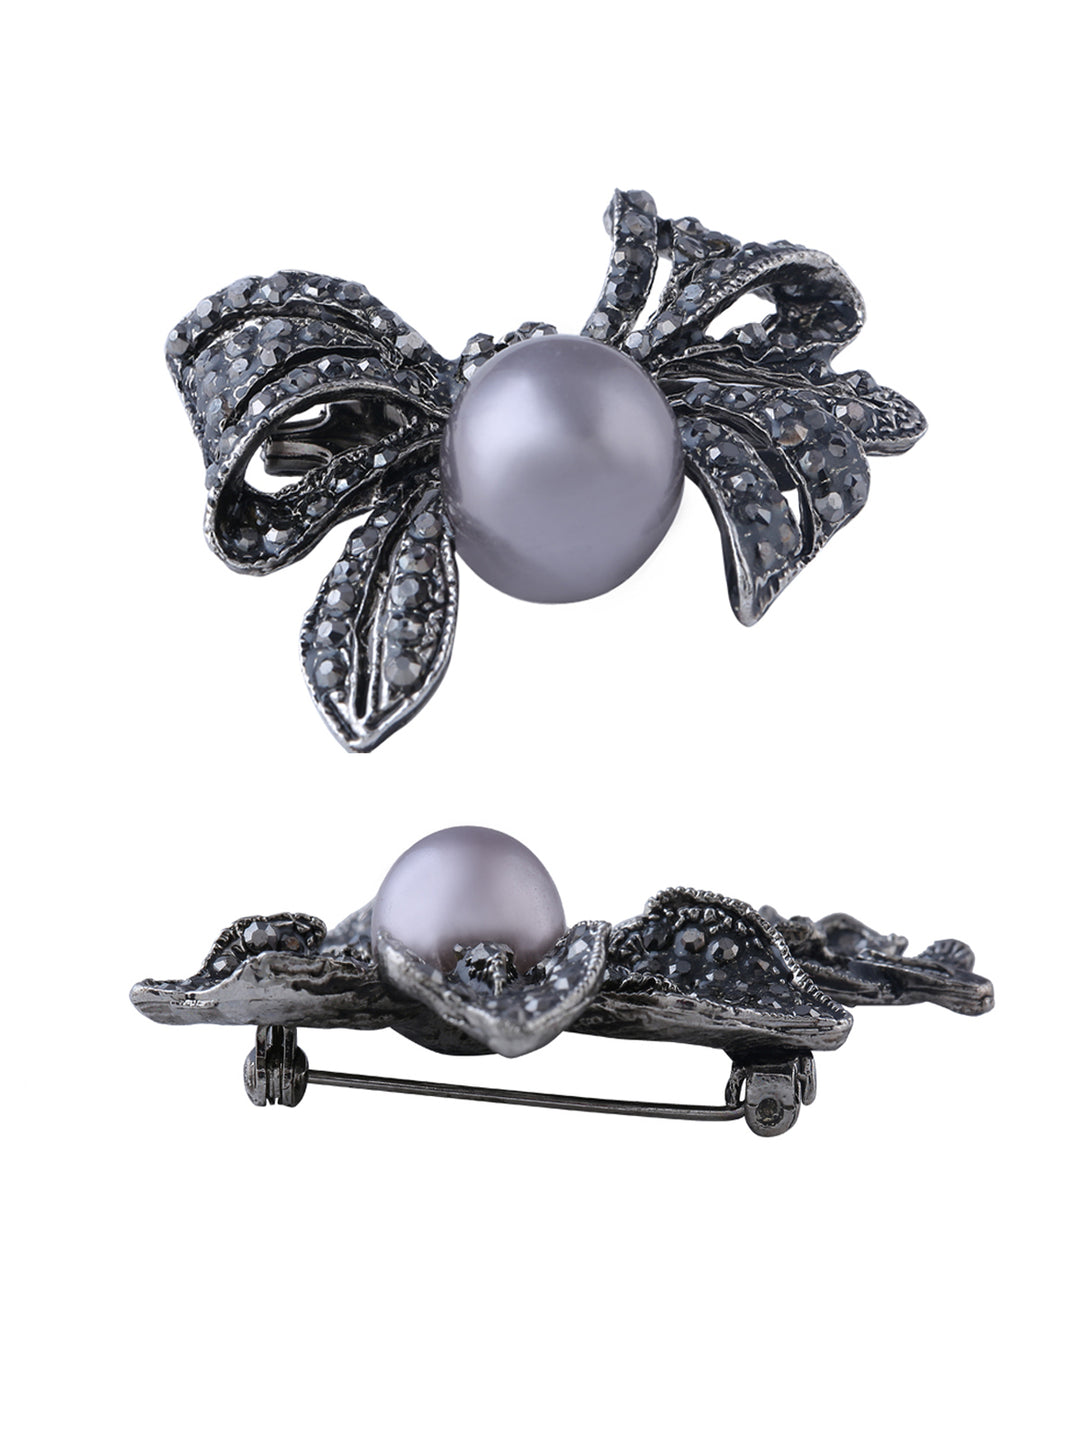 Bow-Knot Design Diamond And Pearl Exquisite Black Nikel (Gunmetal) Brooch Pin